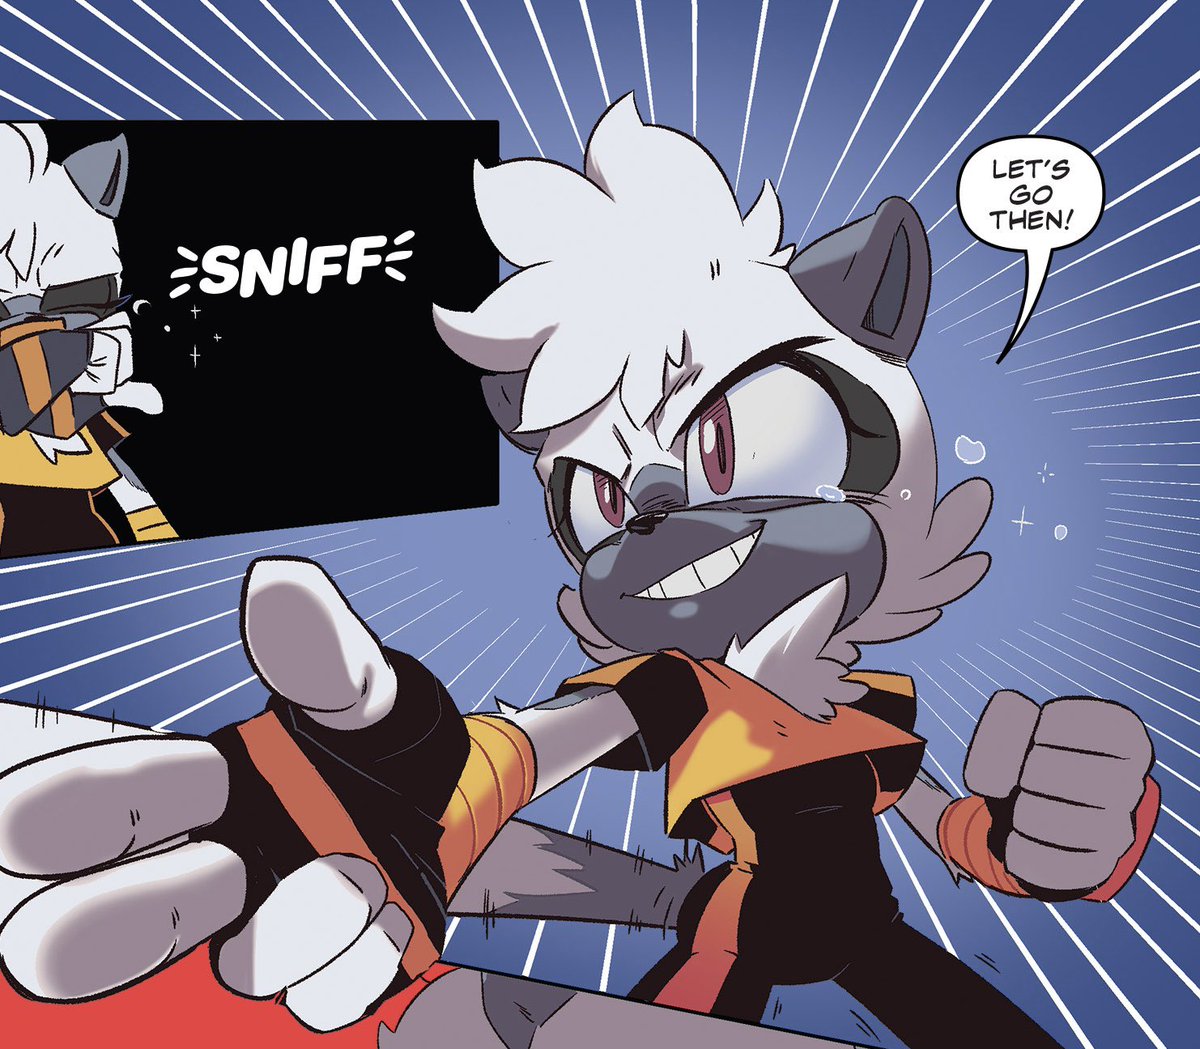 What are your thoughts on Tangle the Lemur?

#IDWSonic #TangleTheLemur